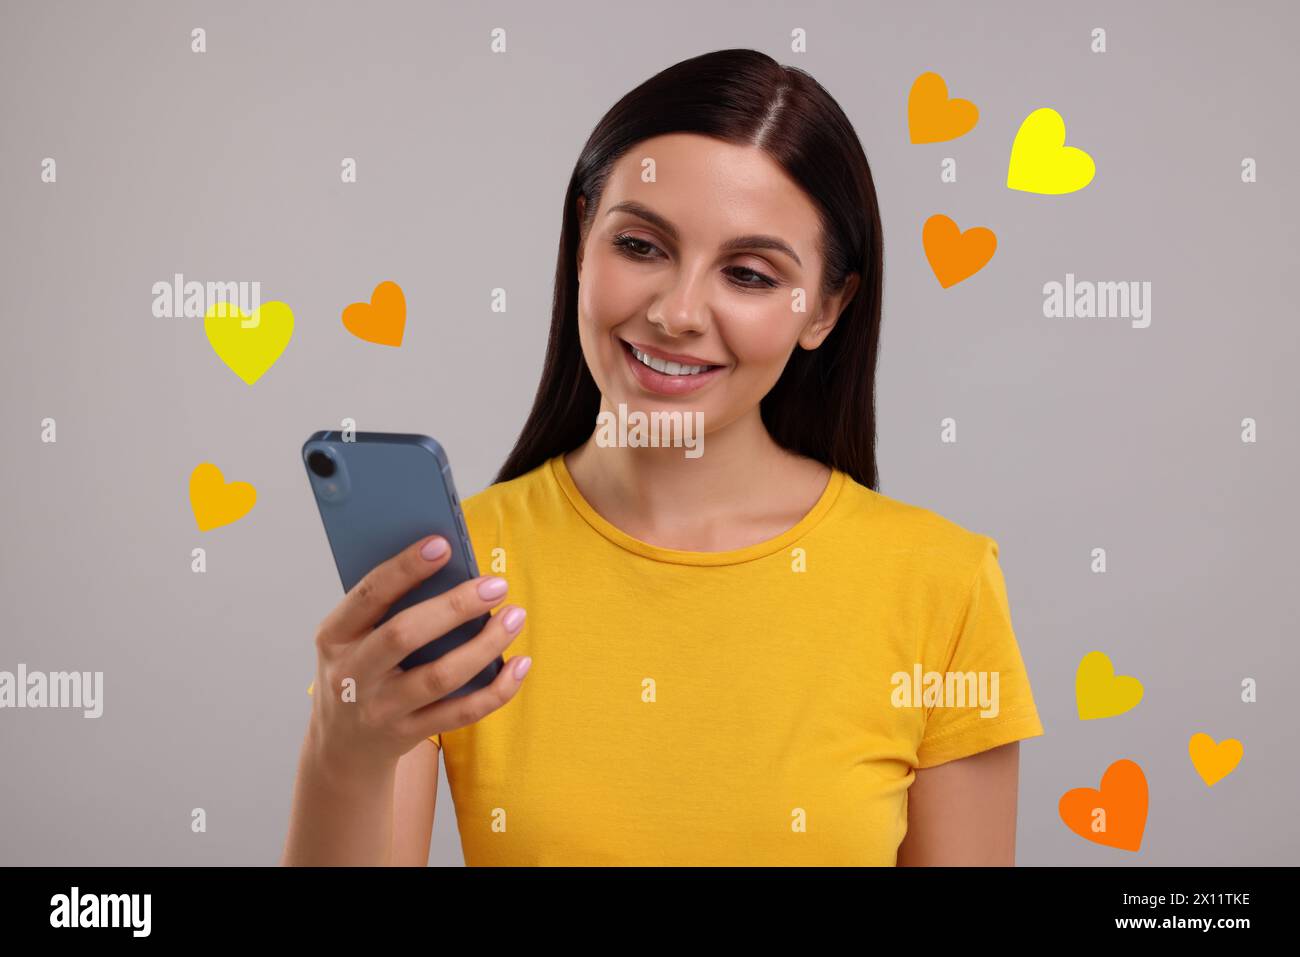 Long distance love. Woman chatting with sweetheart via smartphone on grey background. Hearts flying out of device and swirling around her Stock Photo